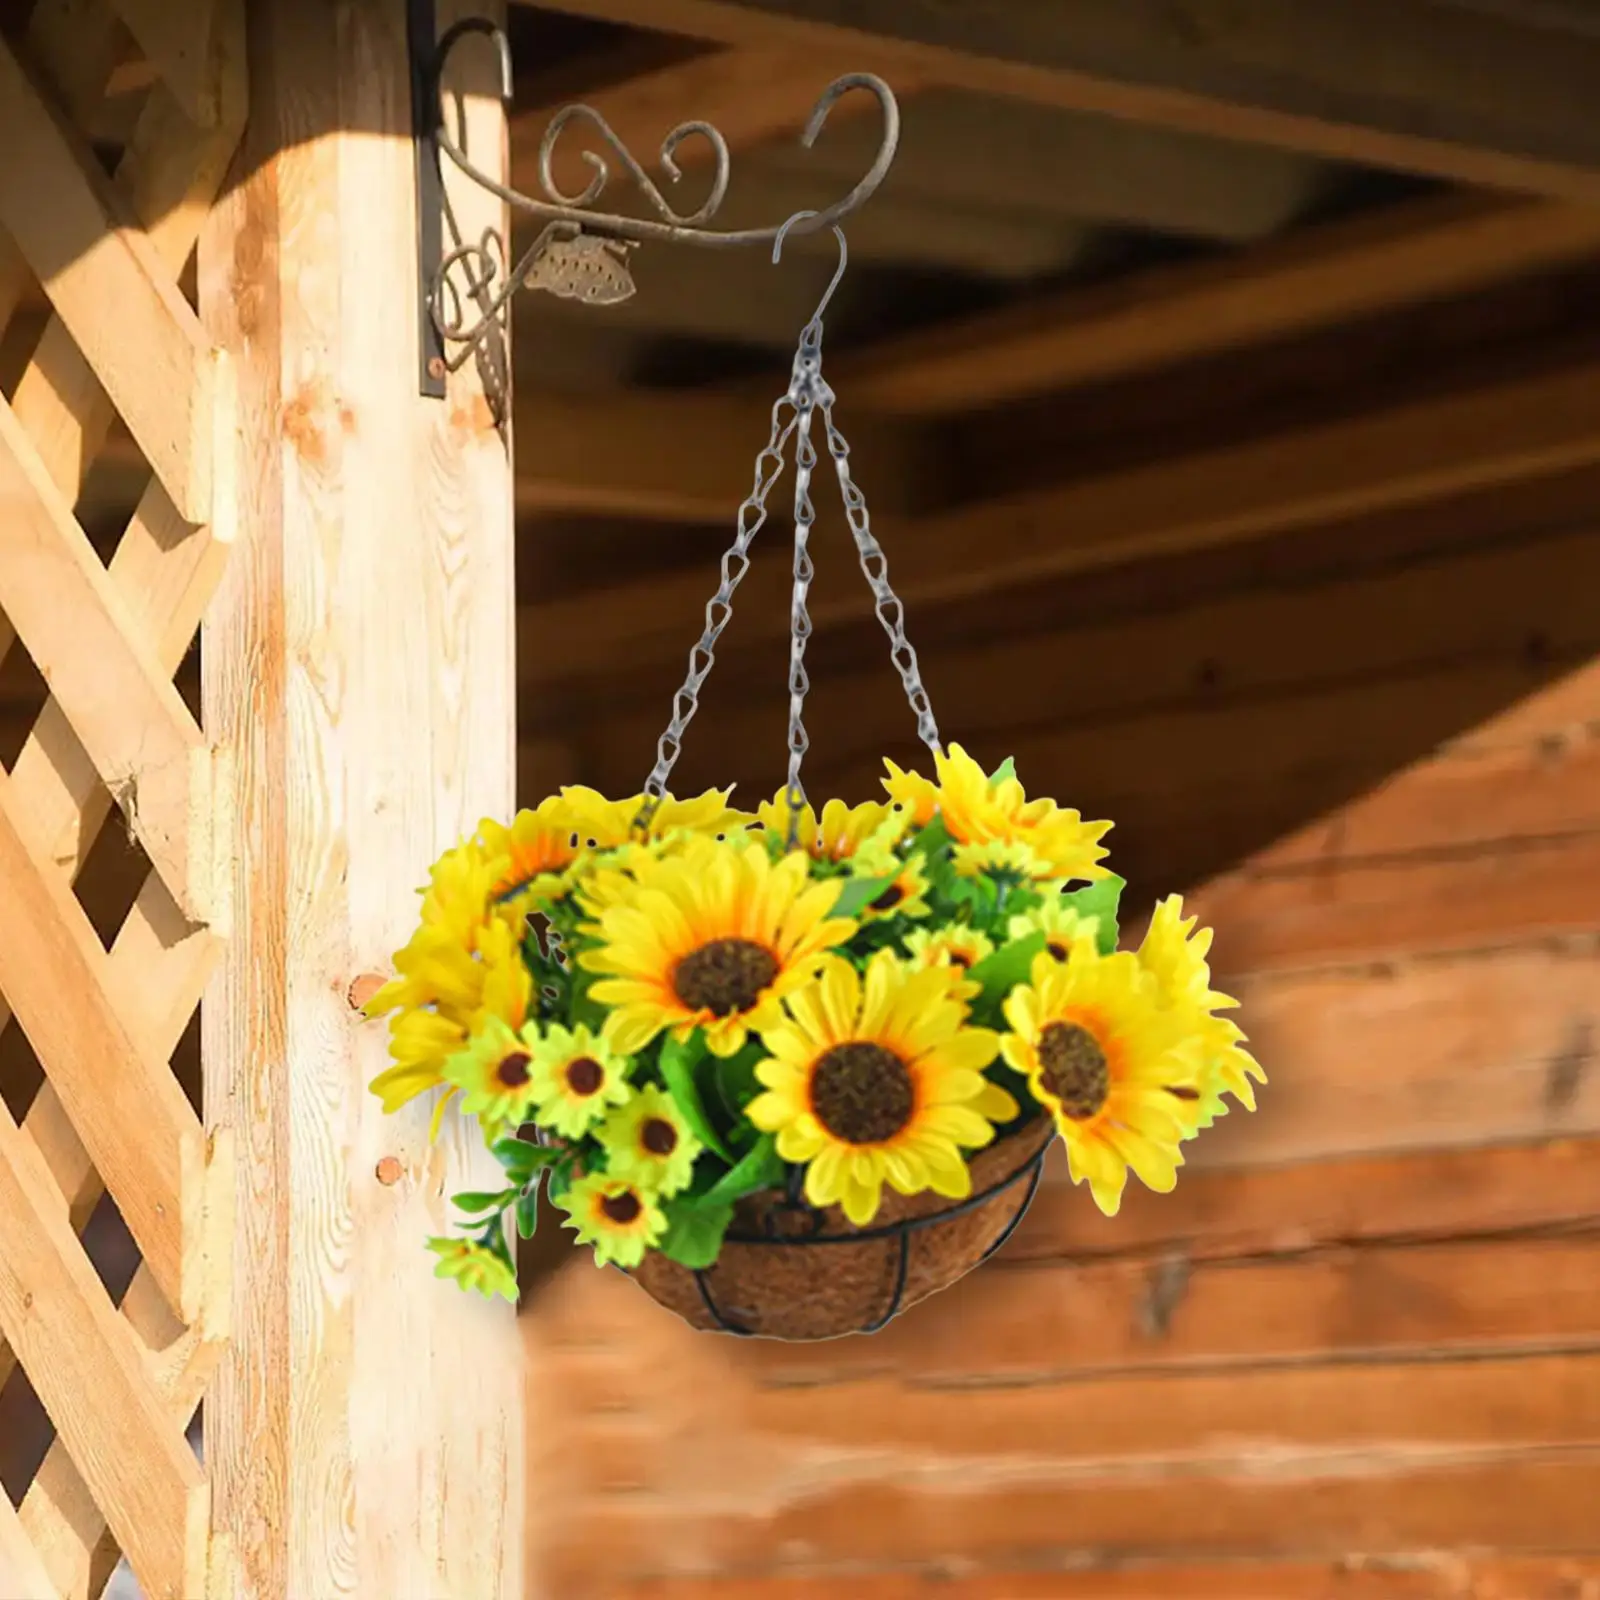 Artificial Hanging Flowers in Basket with Lining Basket Artificial Sunflower Bouquets for Home Outdoor Kitchen Tabletop Bathroom